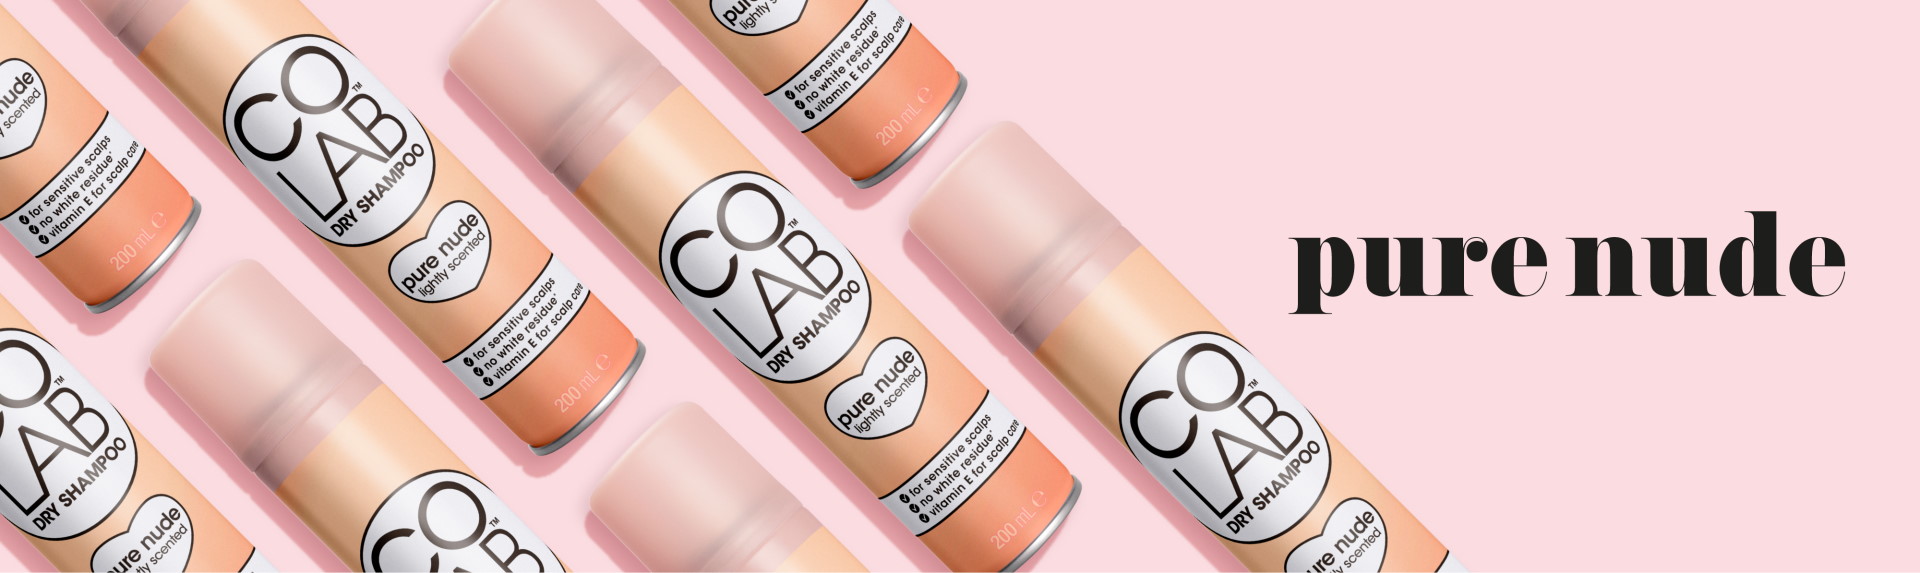 COLAB Dry Shampoo Pure Nude banner